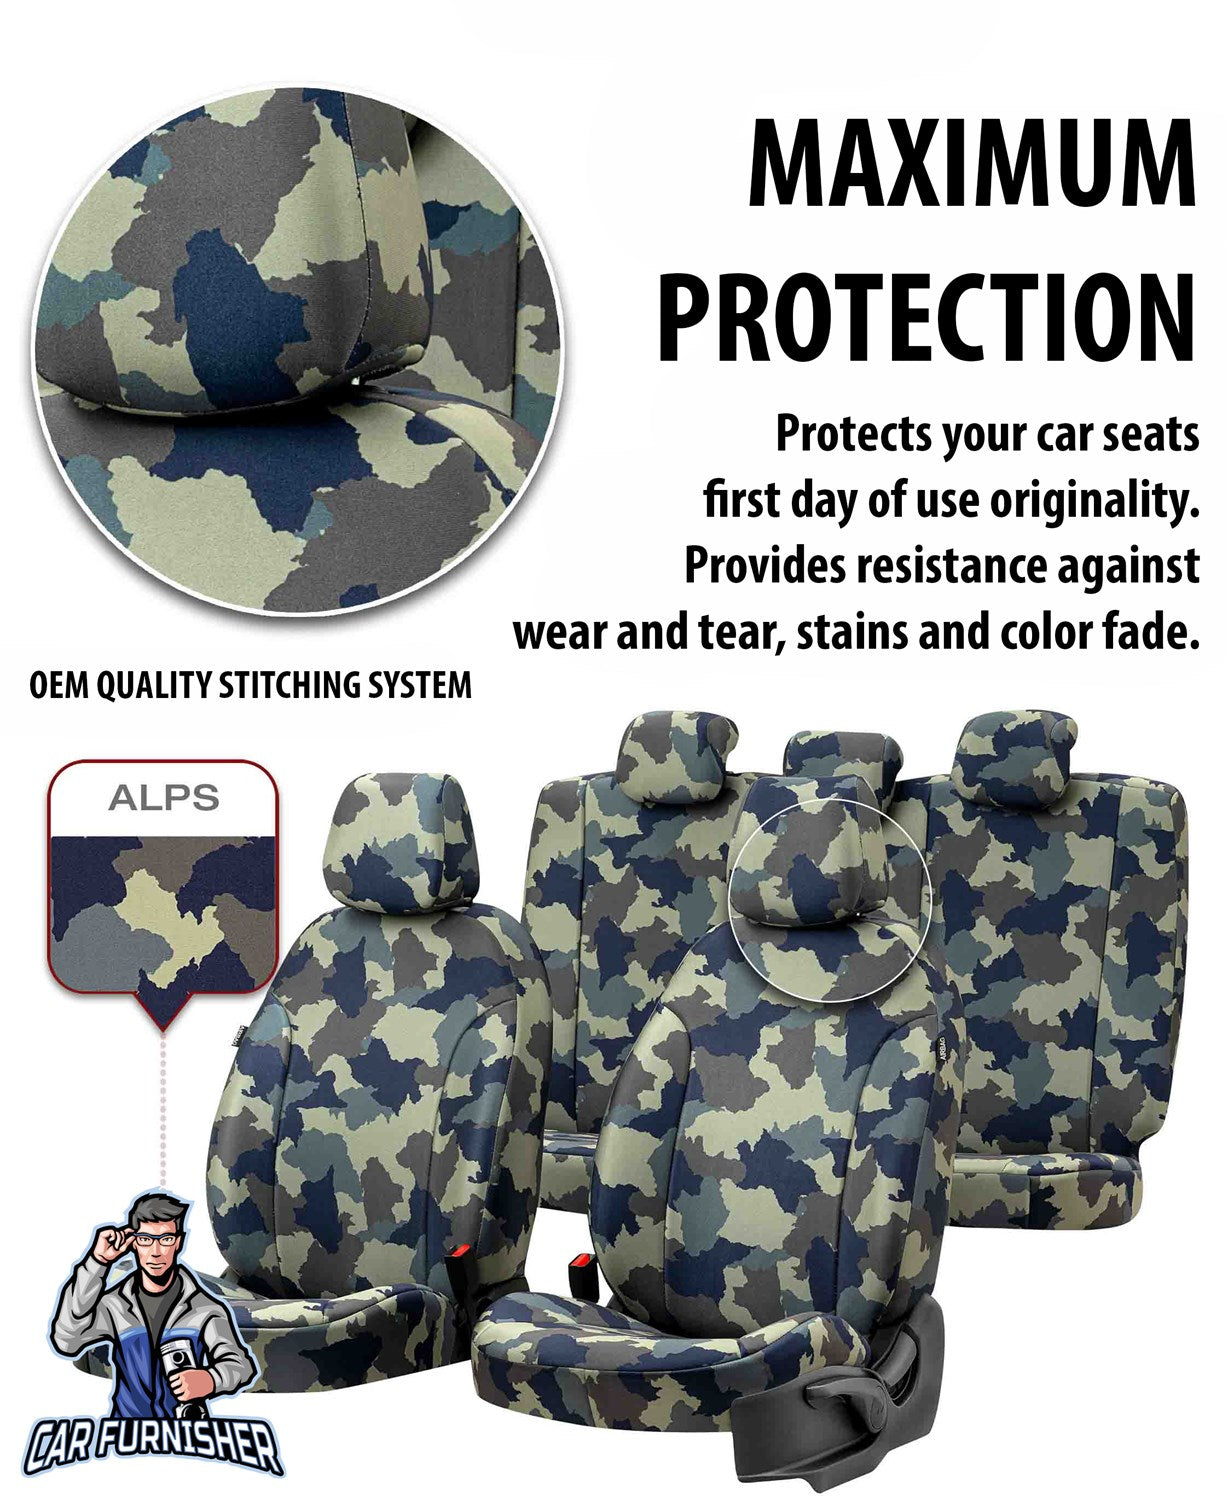 Fiat Scudo Seat Covers Camouflage Waterproof Design Thar Camo Waterproof Fabric